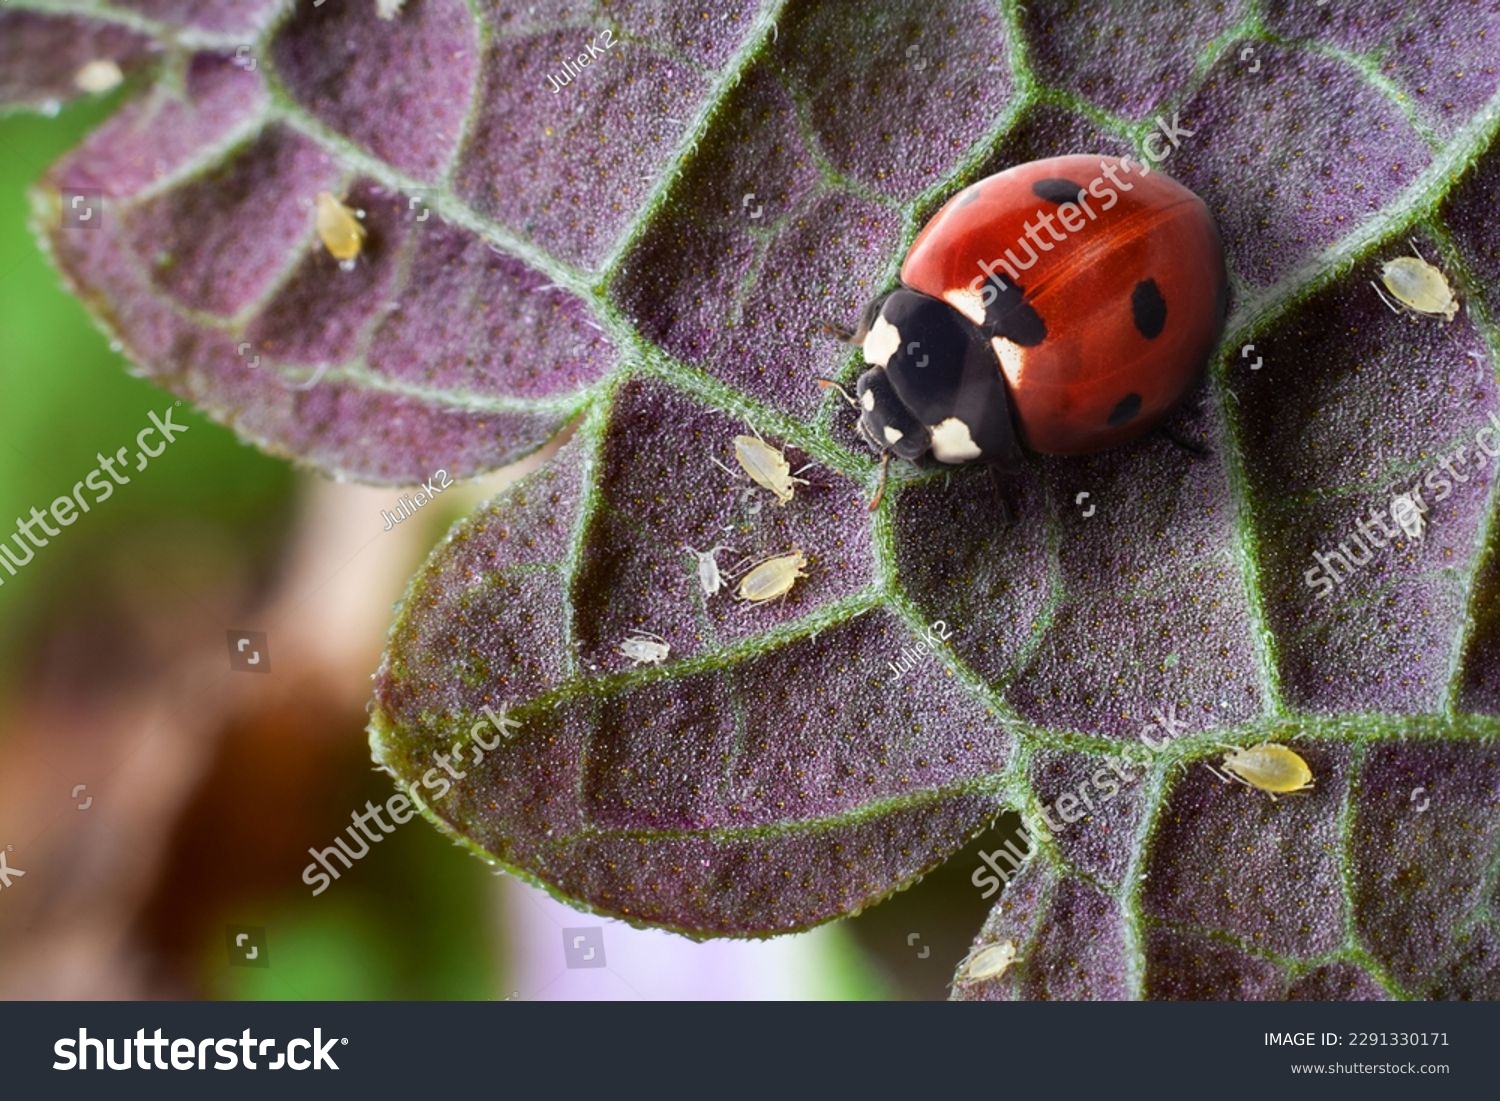 Macro shot of red ladybug and aphids on garden plant leaf #2291330171